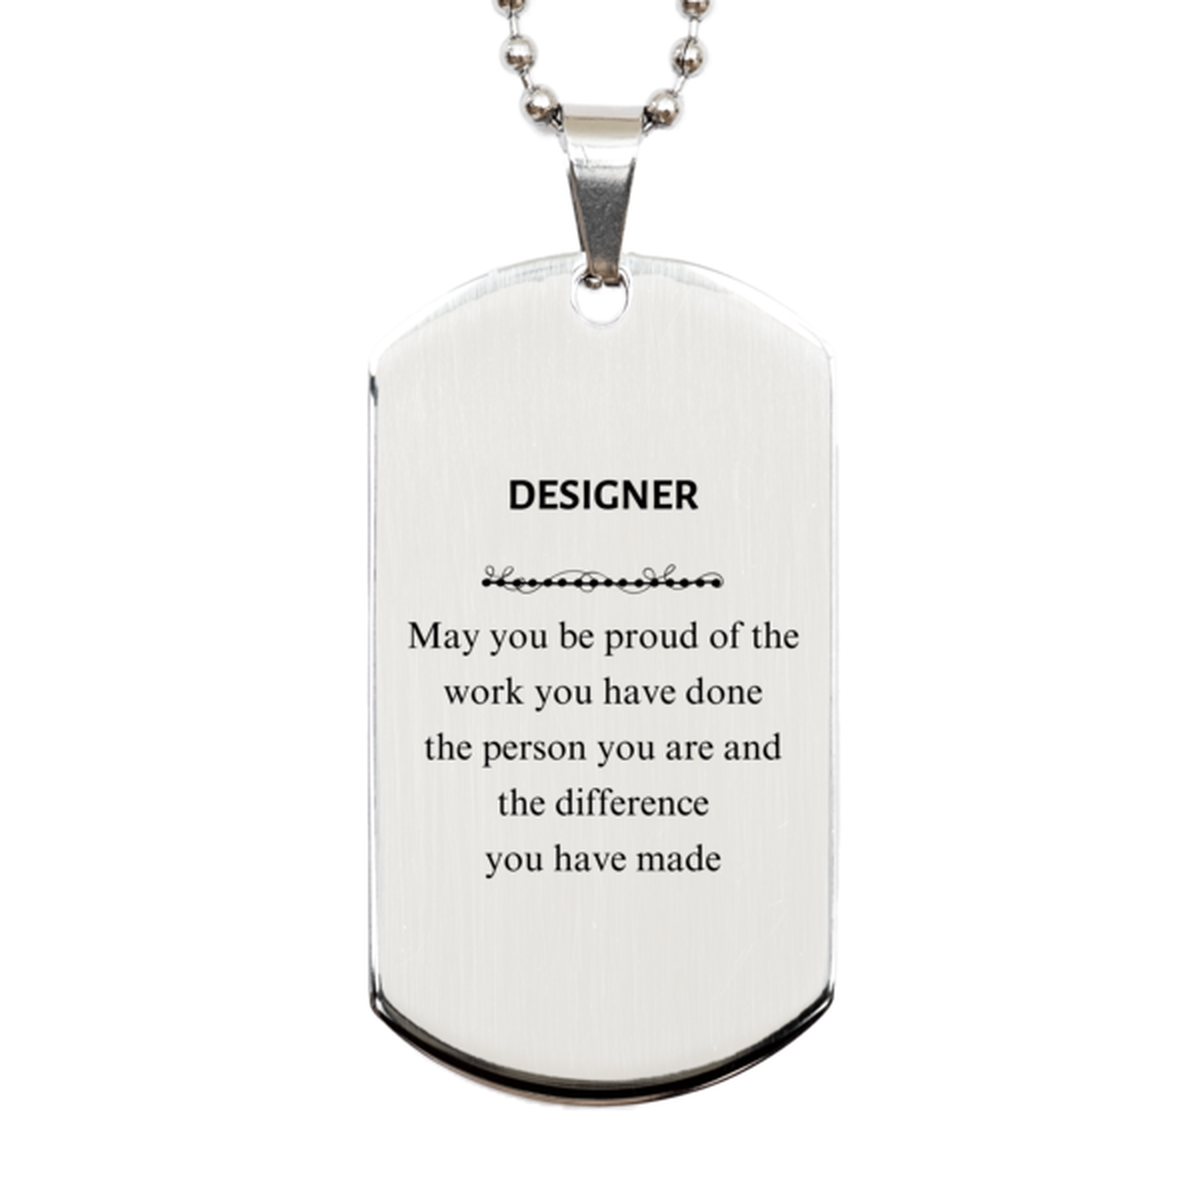 Designer May you be proud of the work you have done, Retirement Designer Silver Dog Tag for Colleague Appreciation Gifts Amazing for Designer